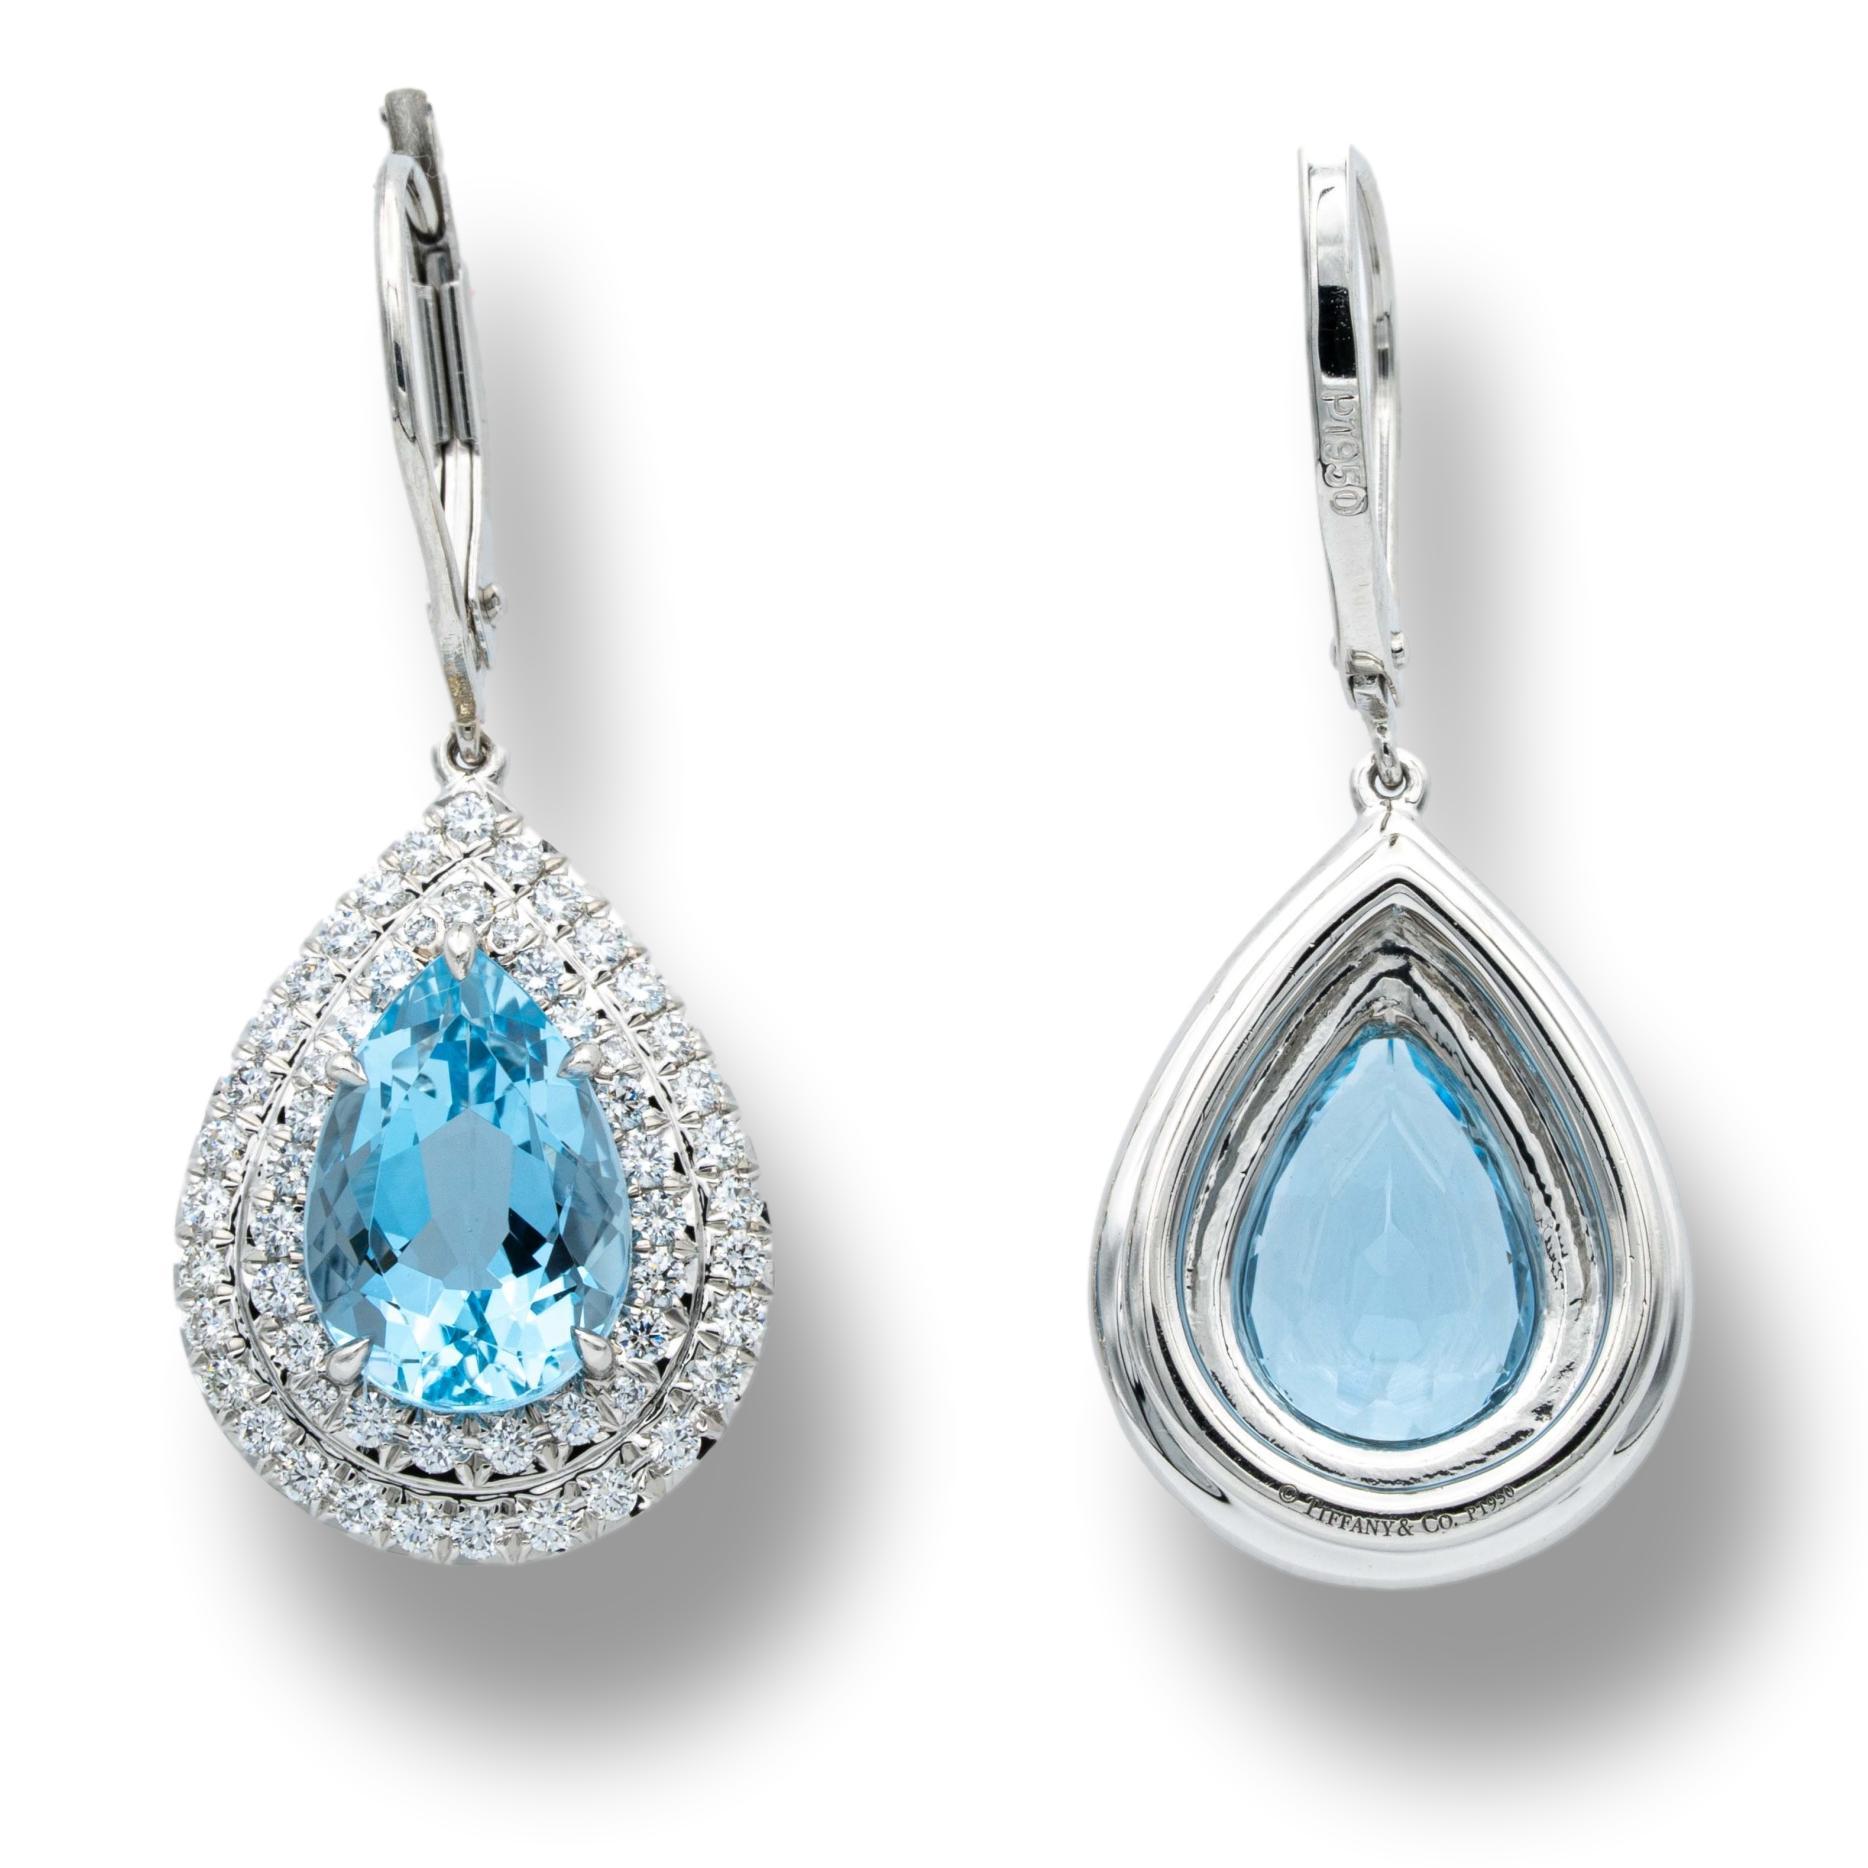 Tiffany & Co. Soleste Aquamarine and Diamond Earrings finely crafted in platinum with pear shape fine quality aquamarines weighing 3.00 carats total surrounded by a double halo of round brilliant cut diamonds weighing .58 carats total weight. The